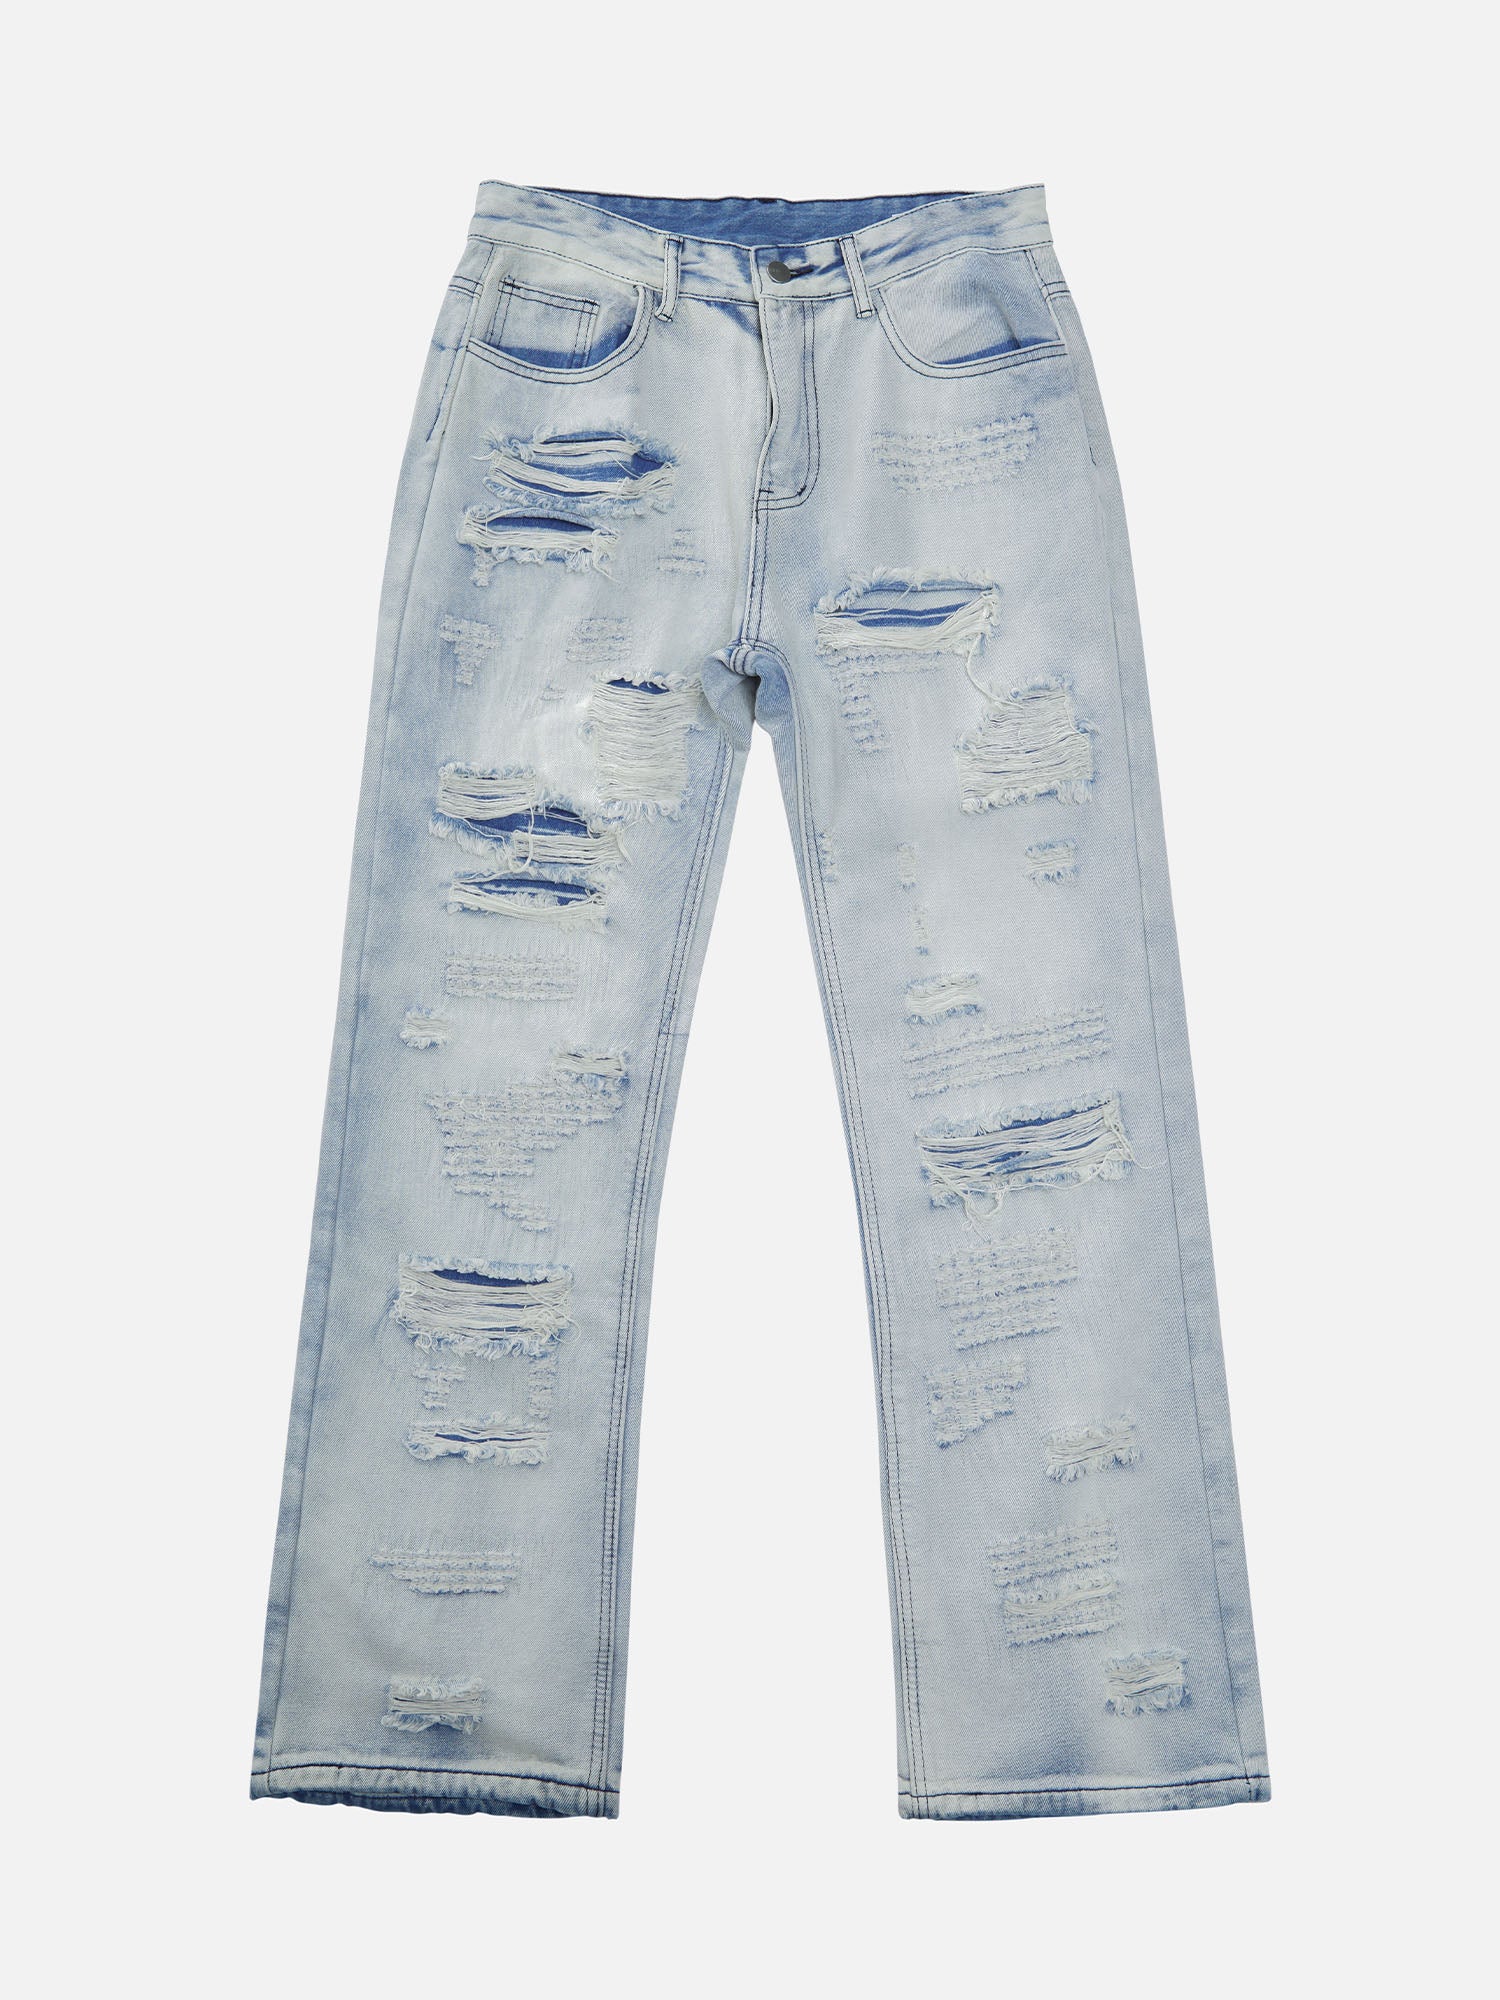 Thesupermade Ripped Jeans -1530